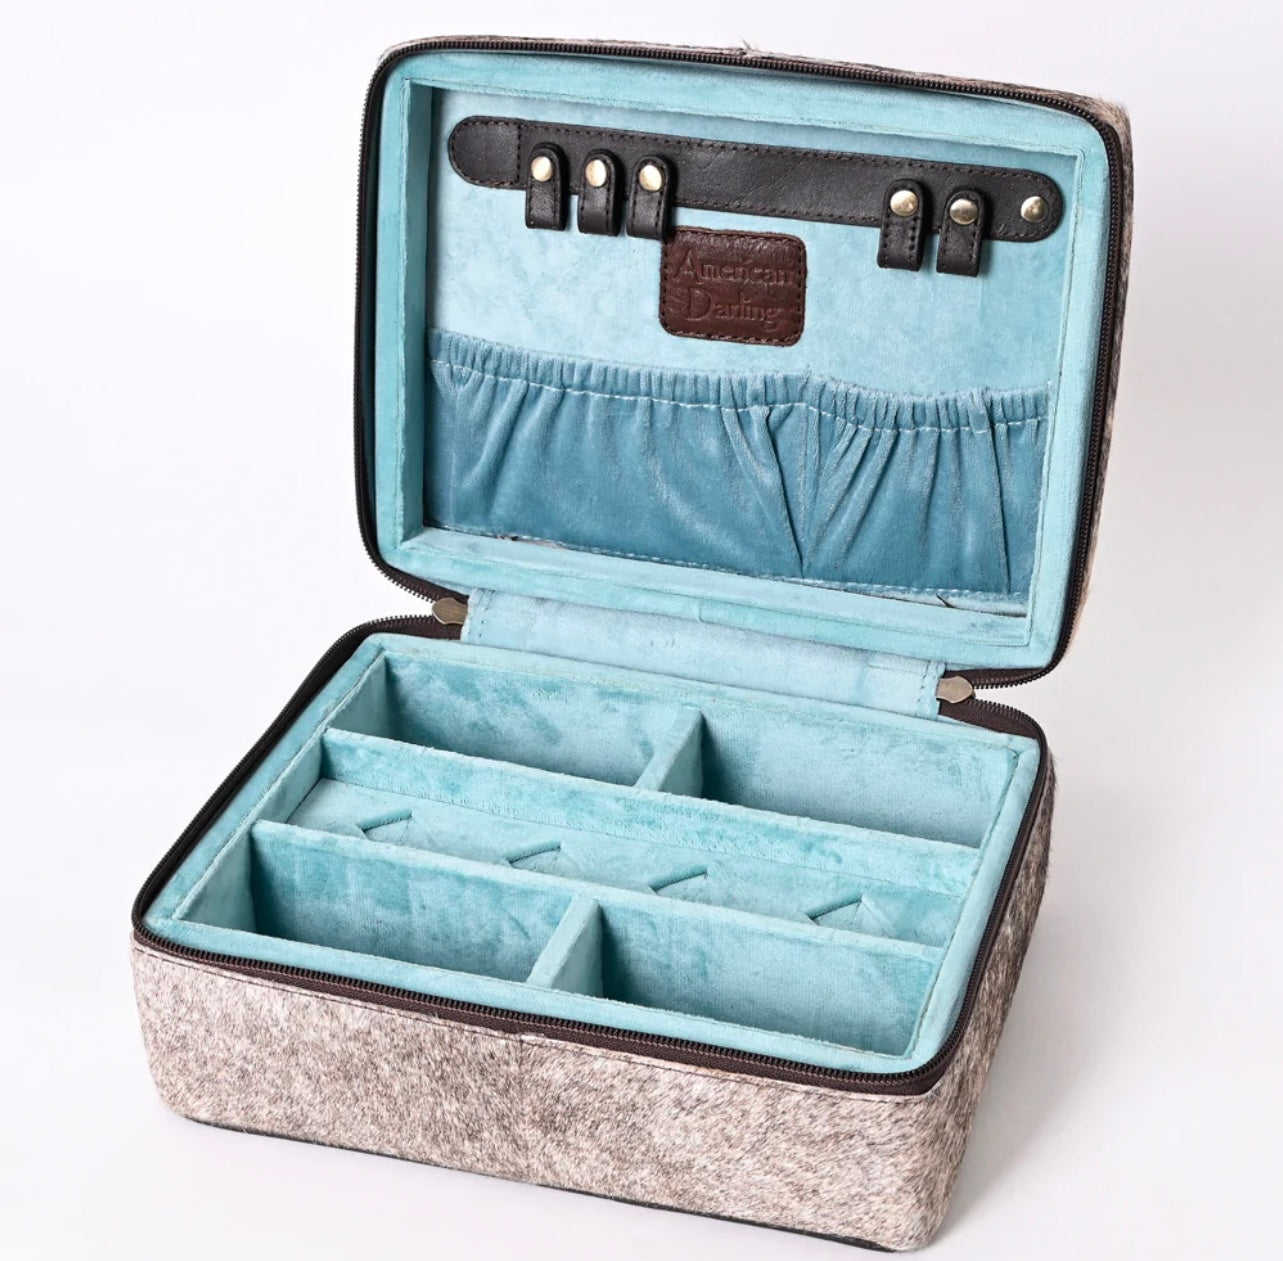 Leather Tooled Teal Inside Jewelry Travel Case